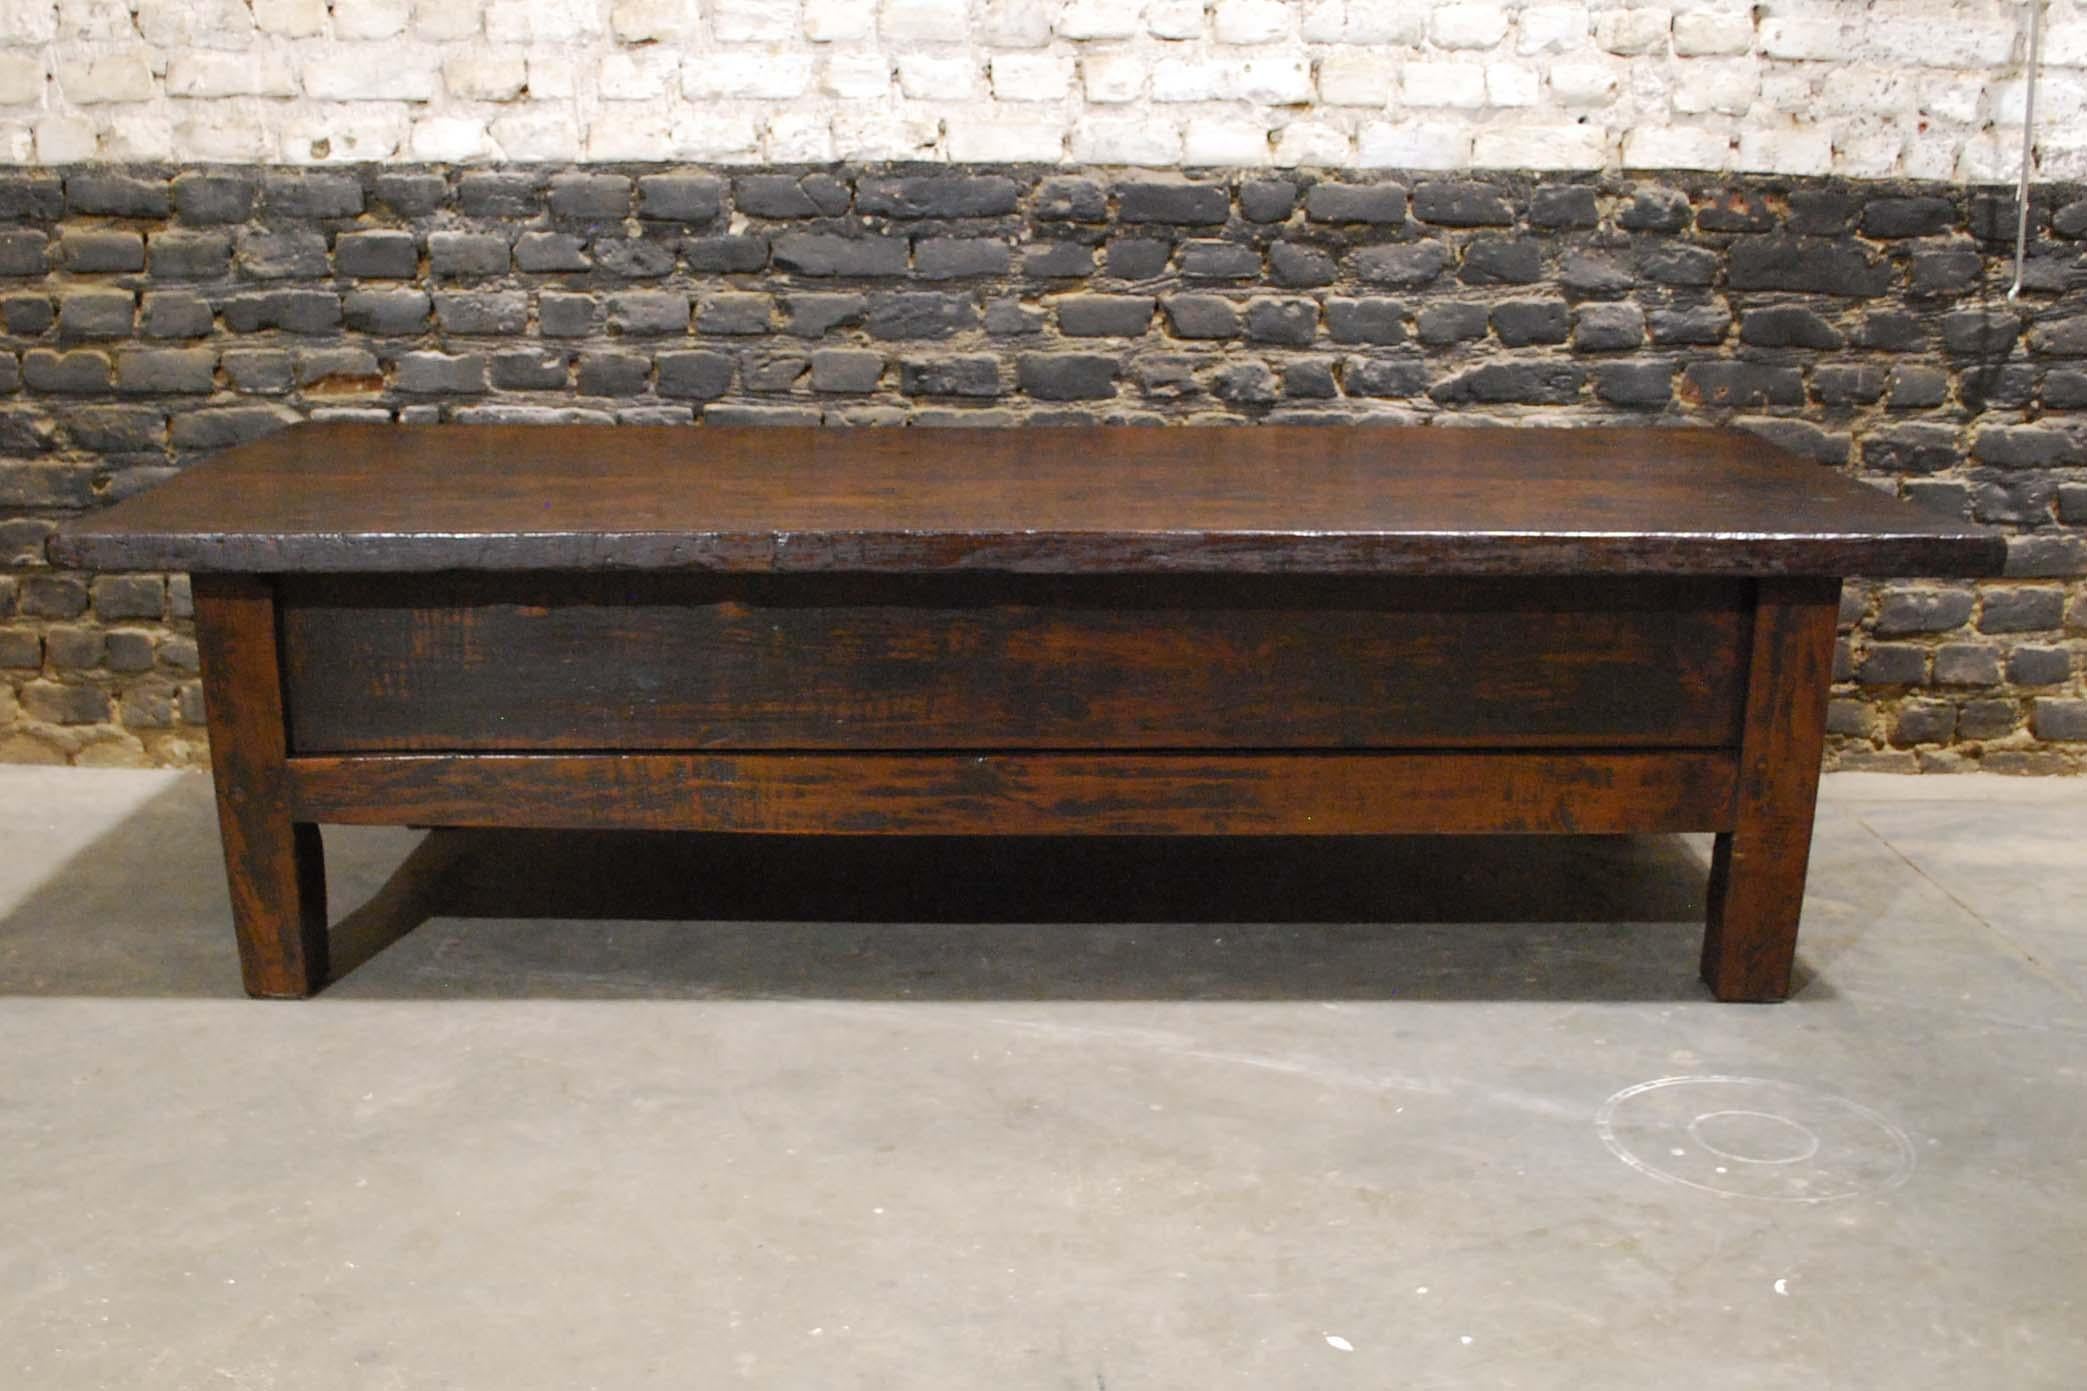 Spanish Colonial Antique 18th Century Rustic Spanish Coffee Table in Chestnut Wood